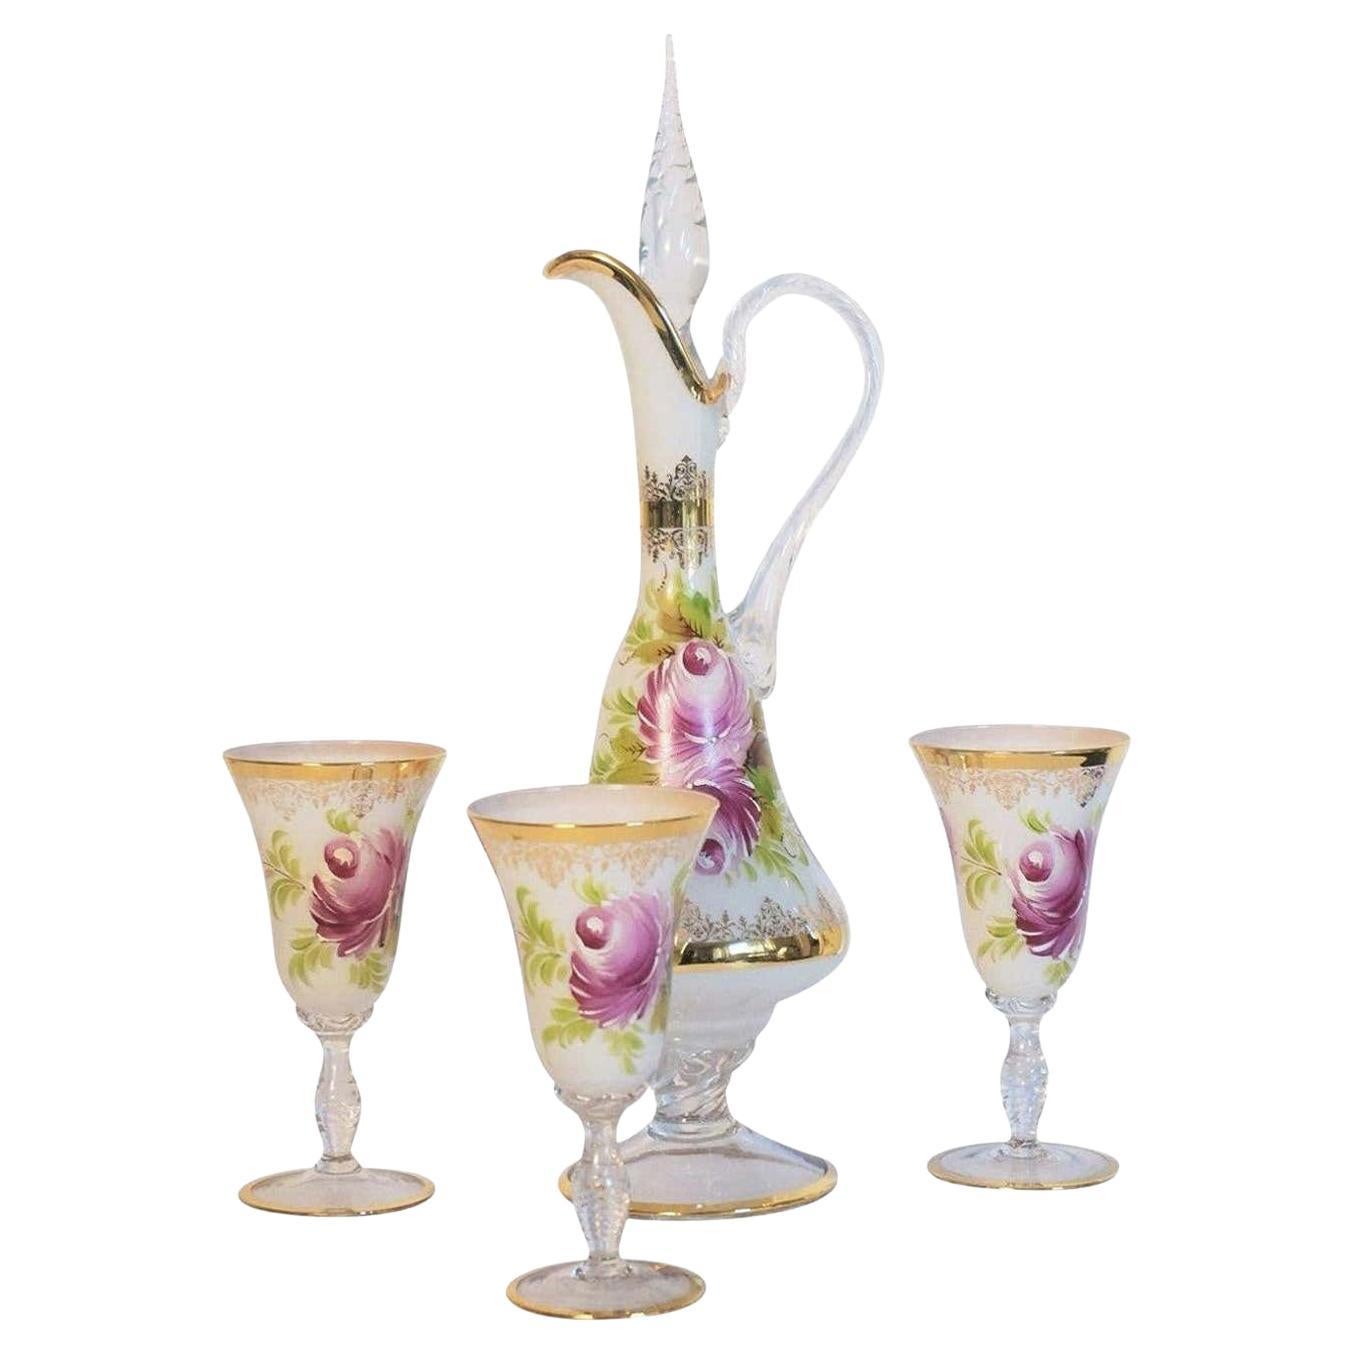 Murano White Opaline Crystal Glass Carafe and Glasses Set, Italy 1960s